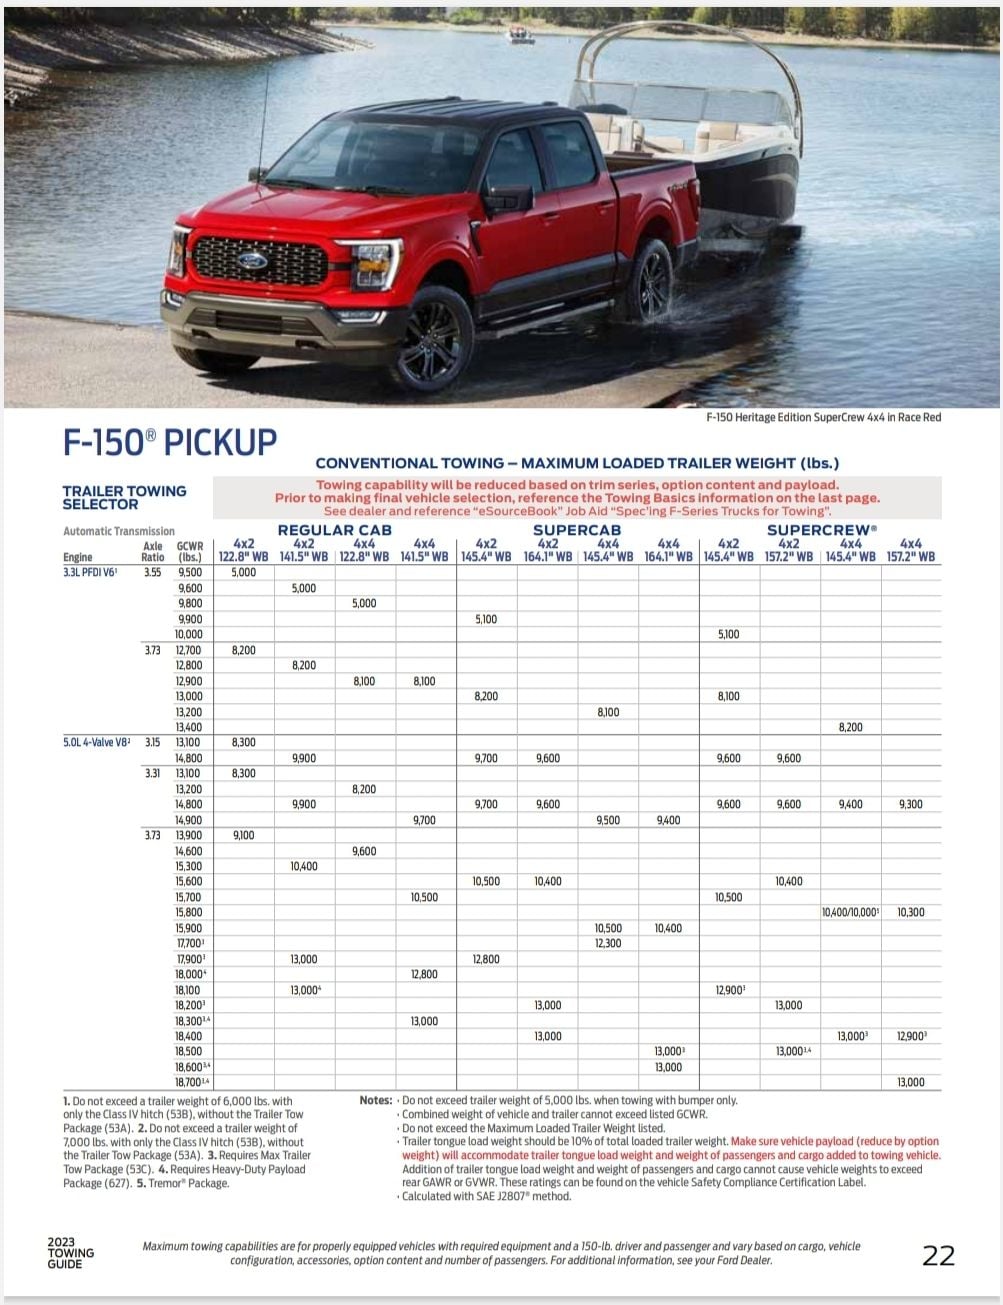 What happened to the "Ford Fleet Towing Guide"? Ford Truck